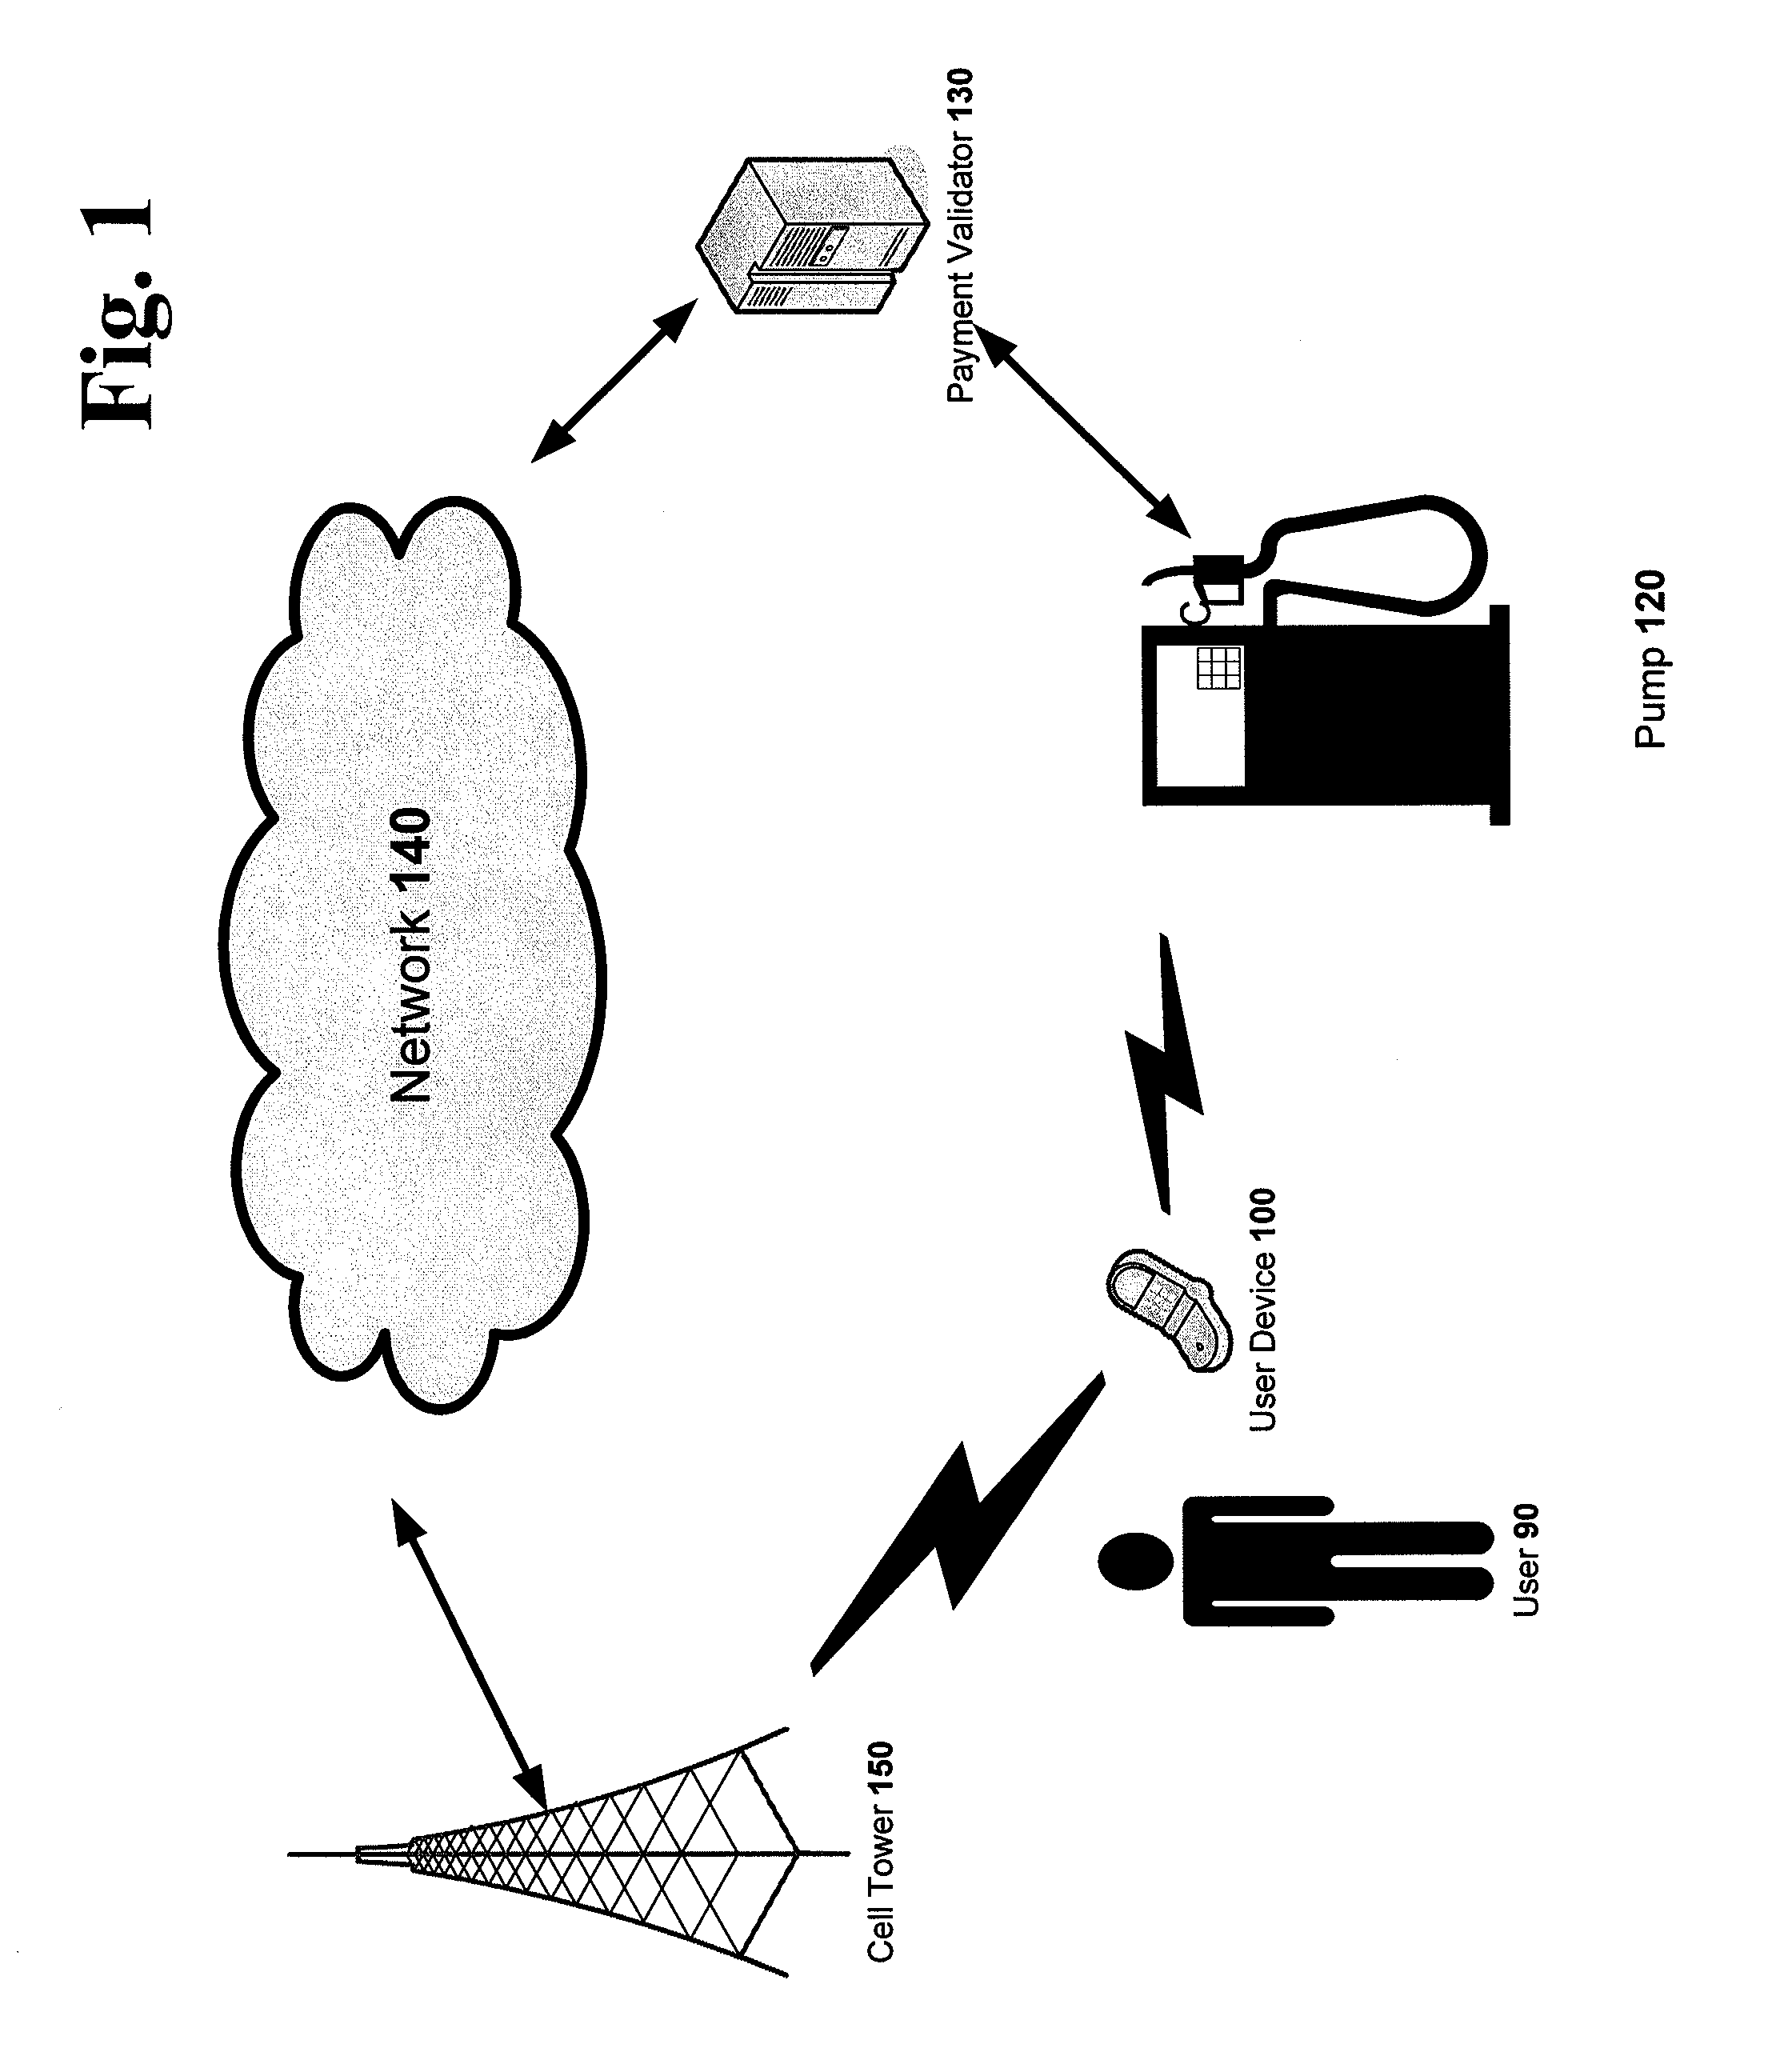 Methods and Systems For Secure Voice-Authenticated Electronic Payment